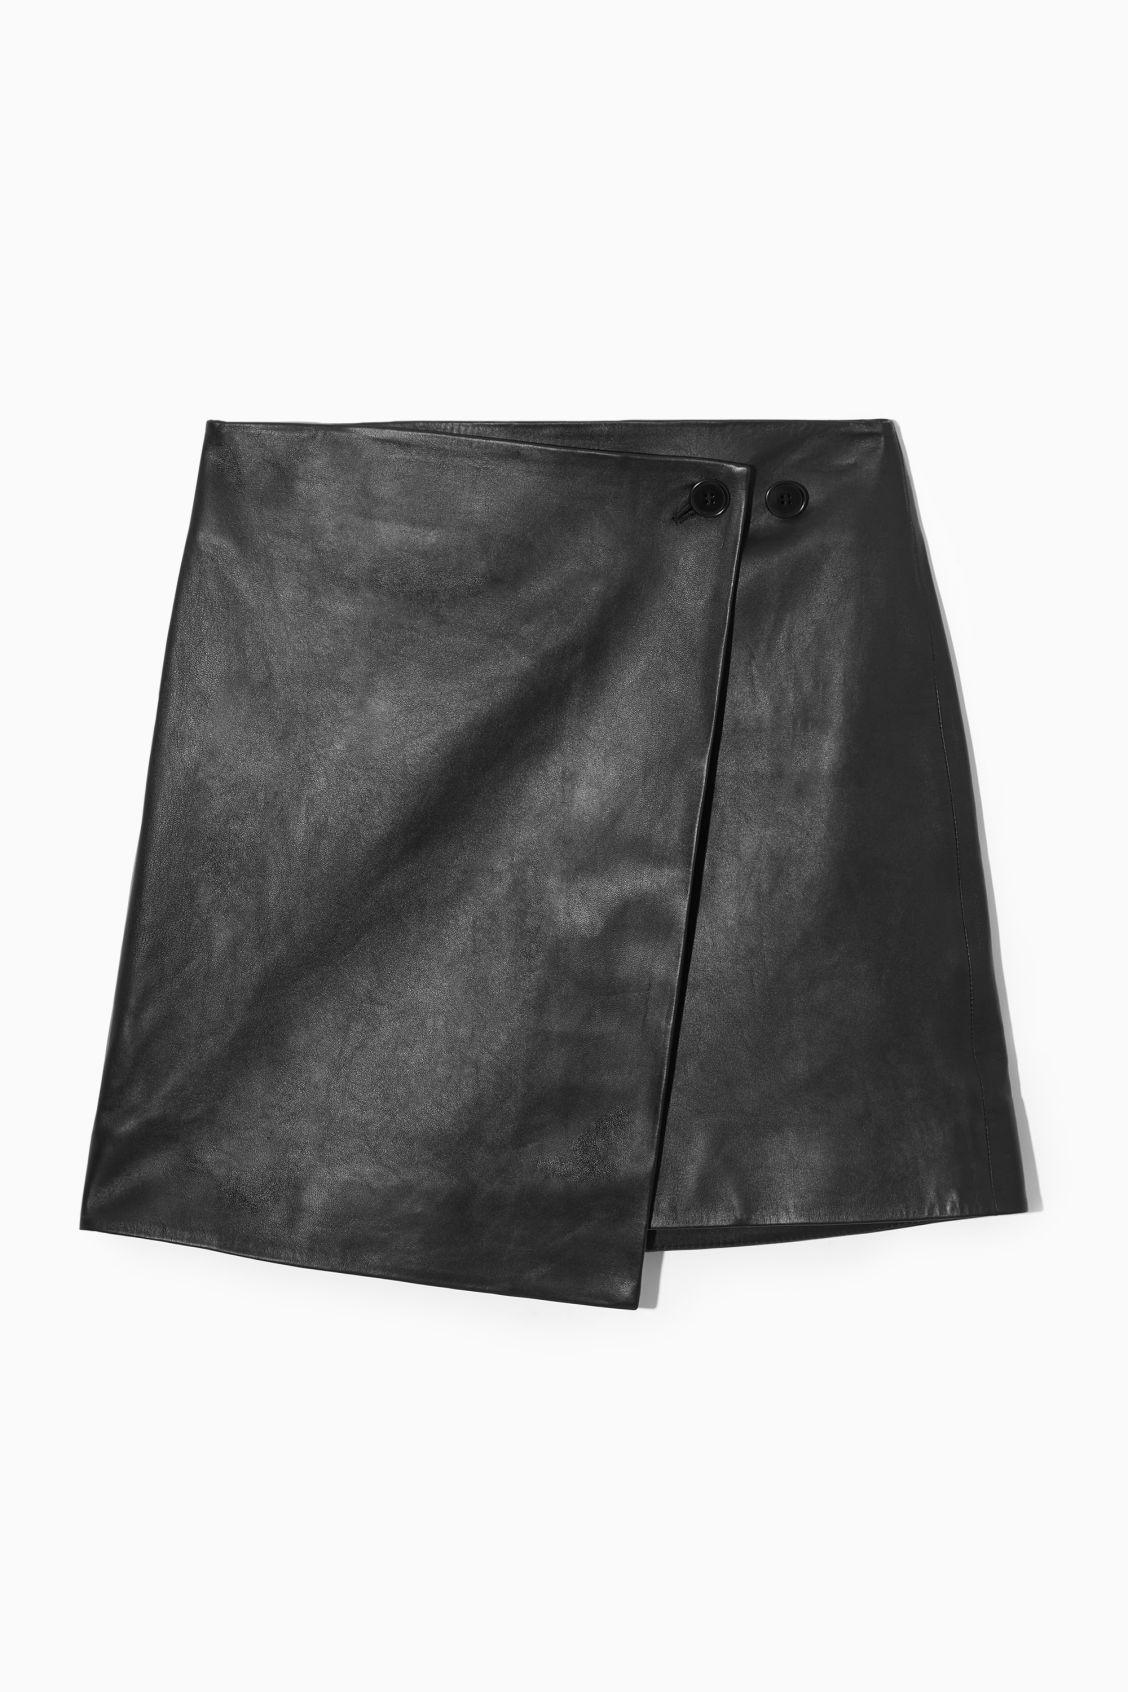 COS Leather Mini Wrap Skirt in Black | Lyst